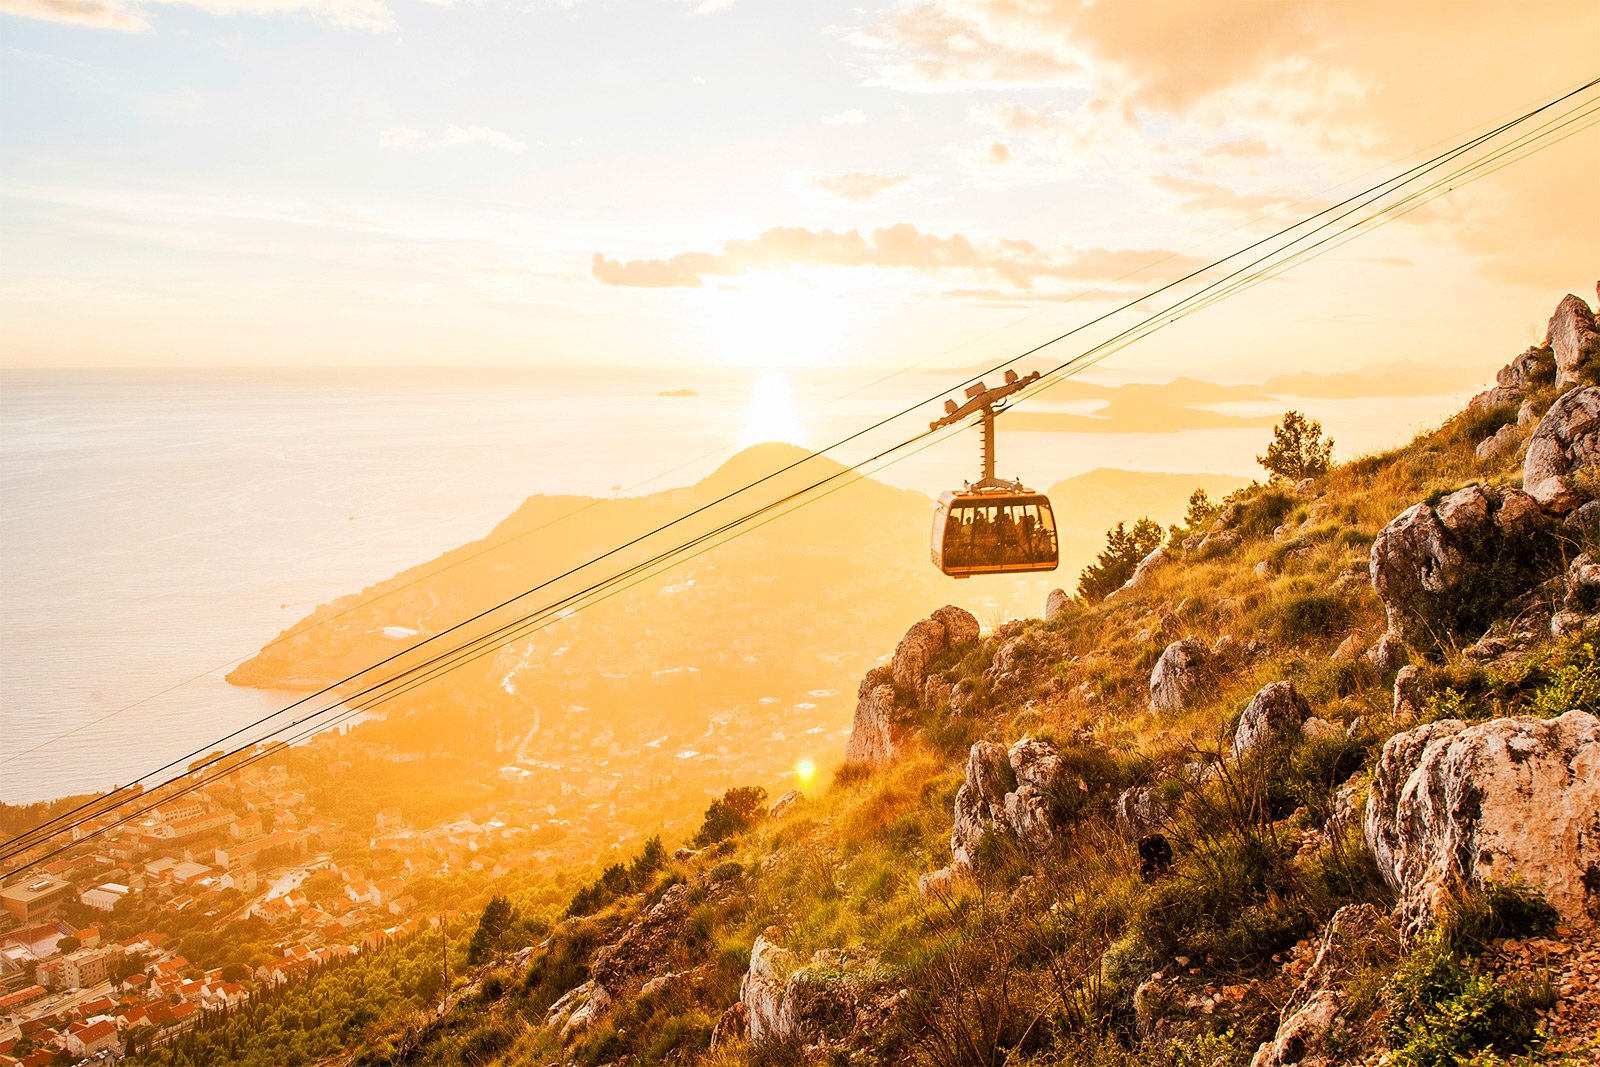 How to ride the Cable Car in Dubrovnik